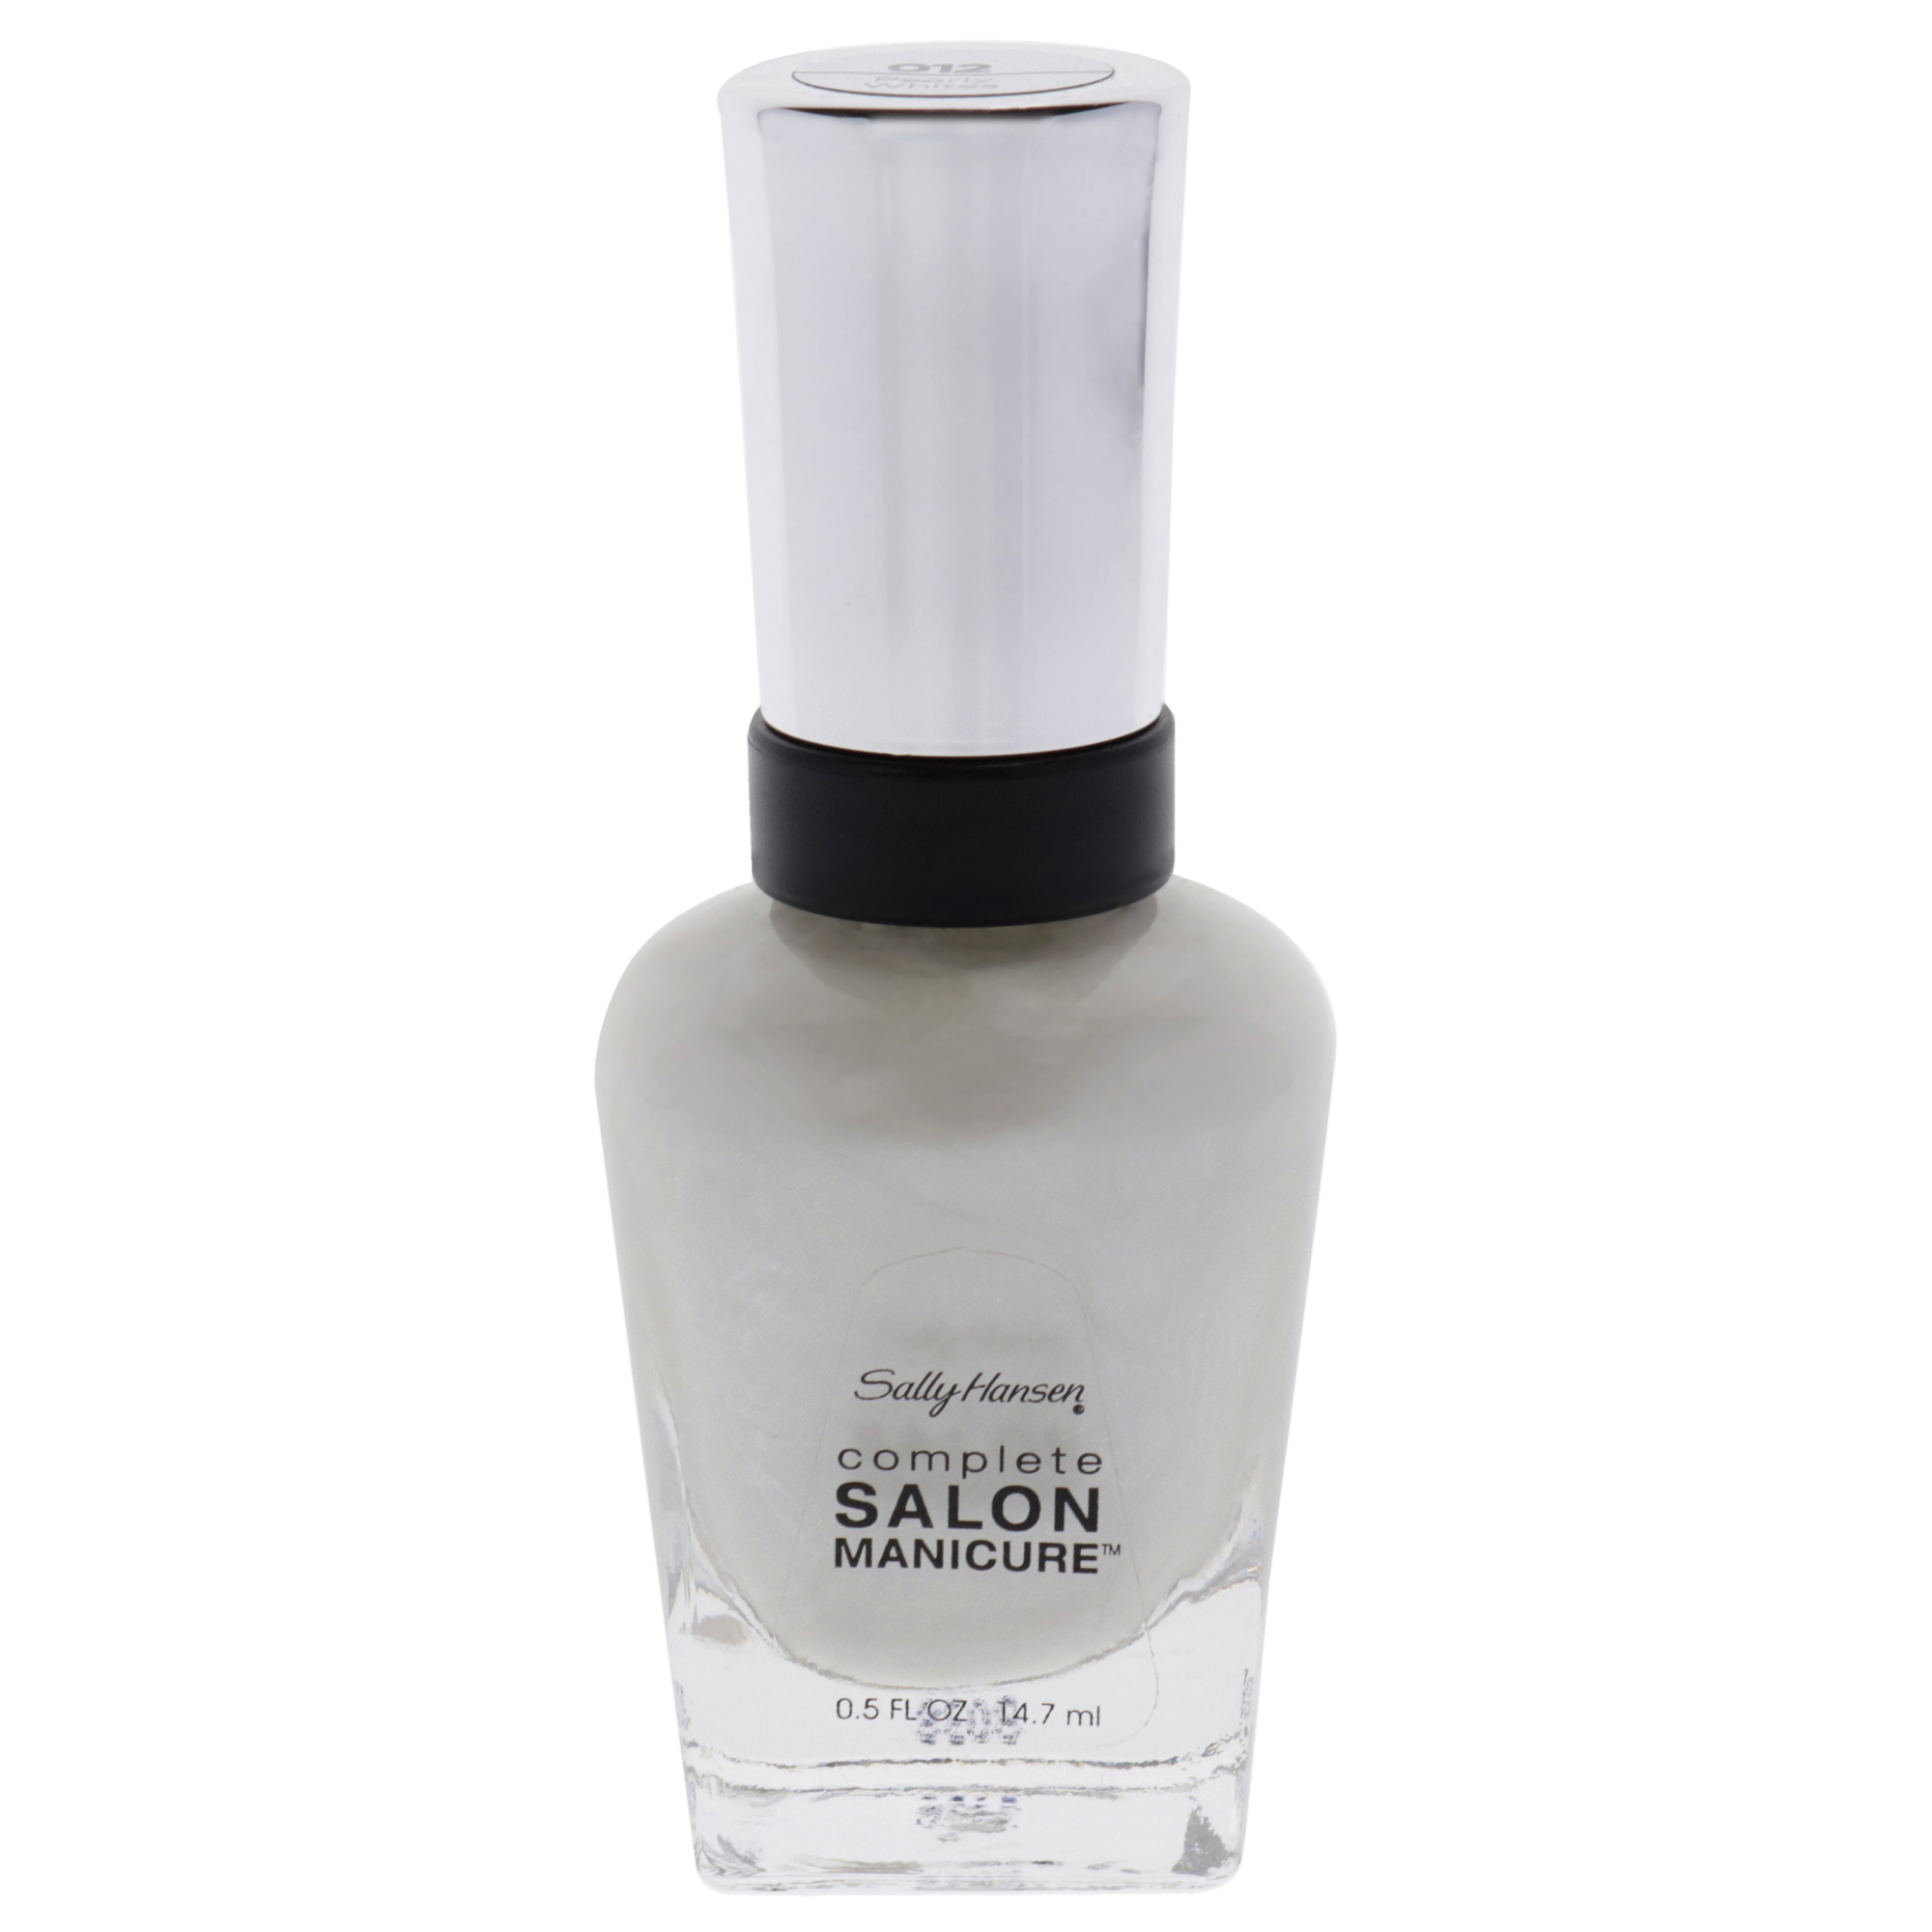 Sally Hansen Complete Salon Manicure Nail Color, Pearly Whites - image 1 of 2